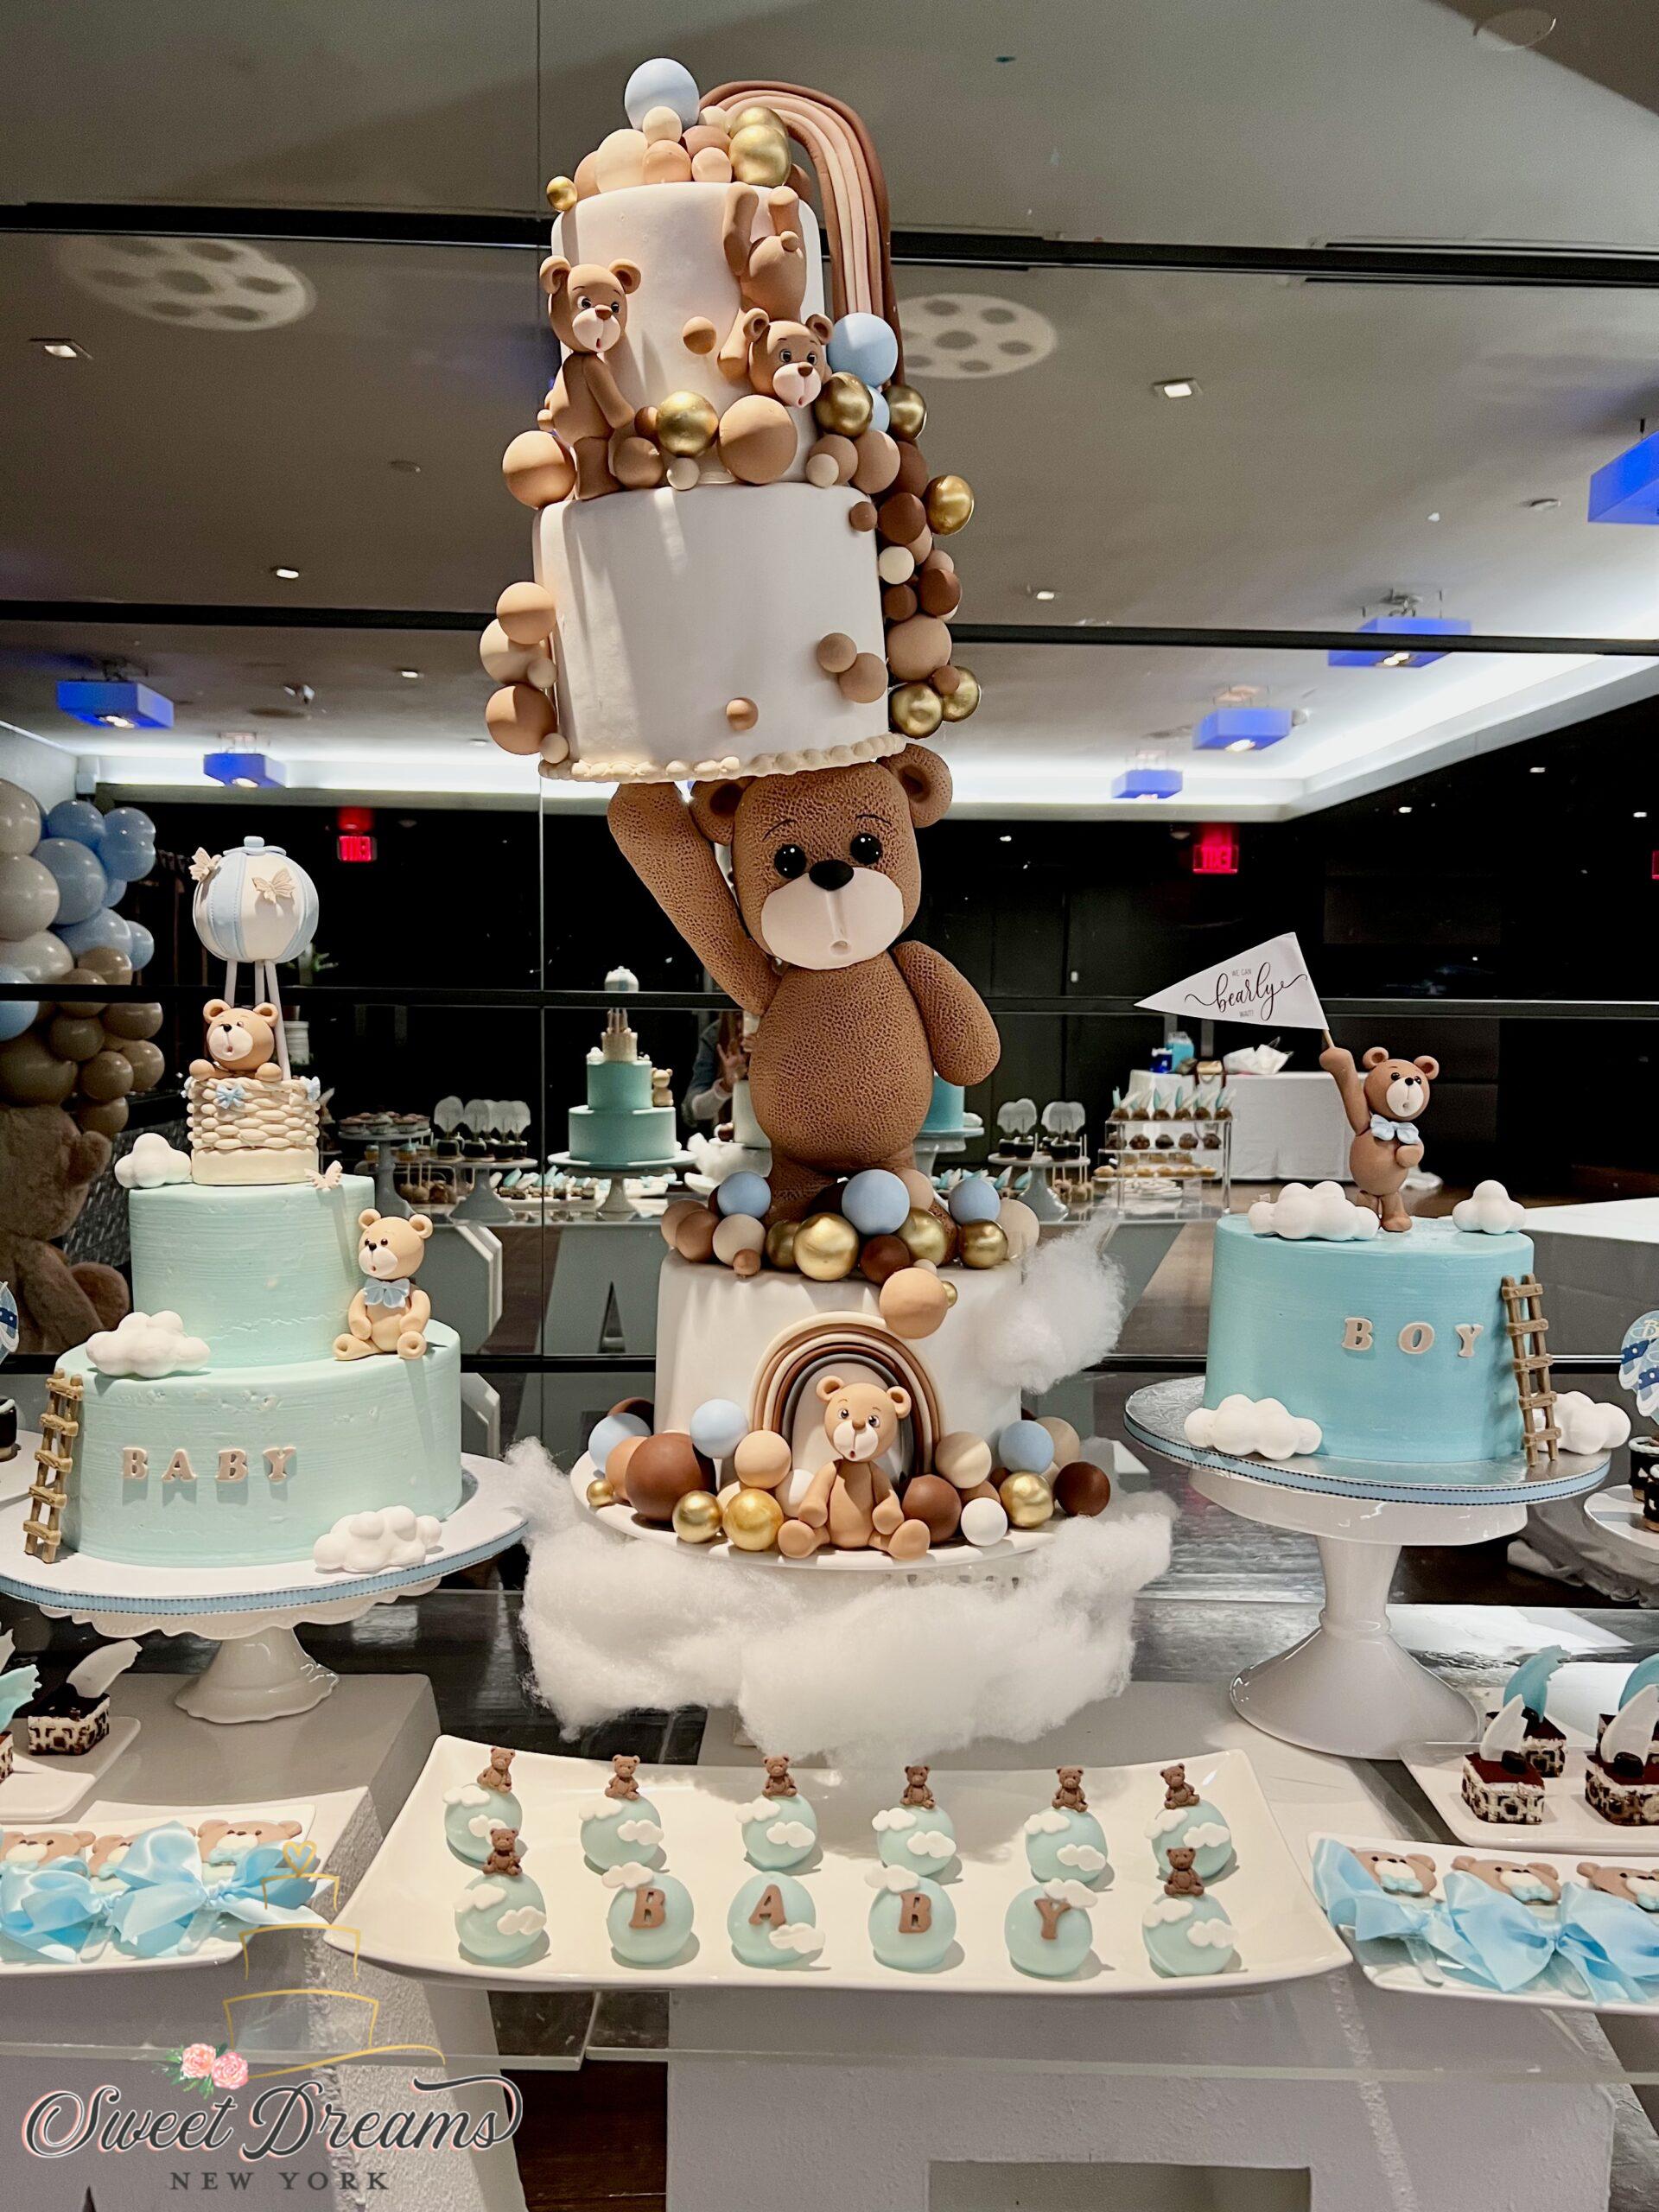 We Can Bearly Wait Baby Shower Dessert Table NYC Long Island ideas gravity defying teddy bear Baby Shower cake